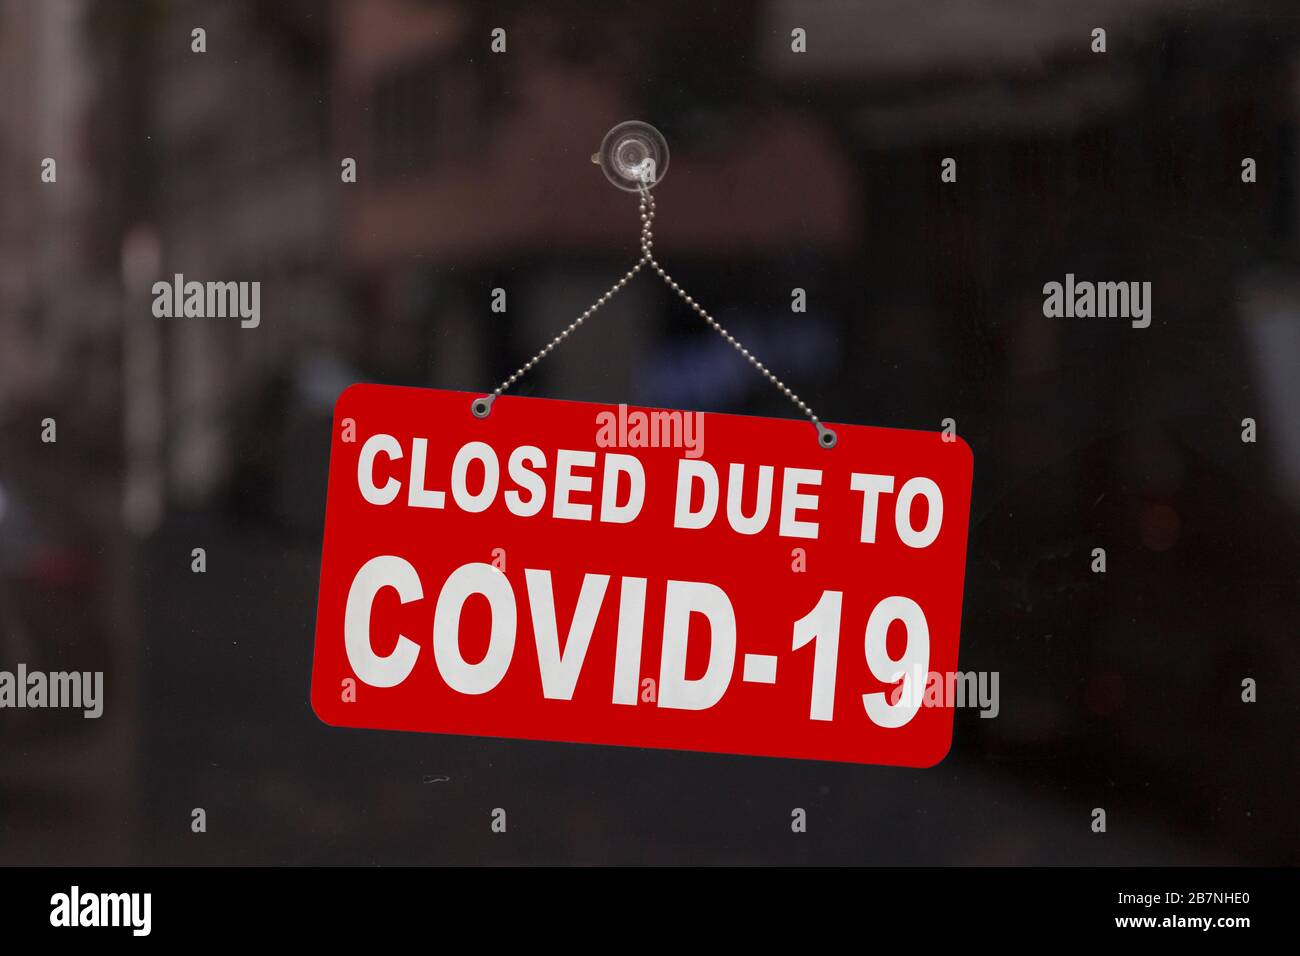 Close Up On A Red Closed Sign In The Window Of A Shop Displaying The Message Closed Due To Covid 19 Stock Photo Alamy